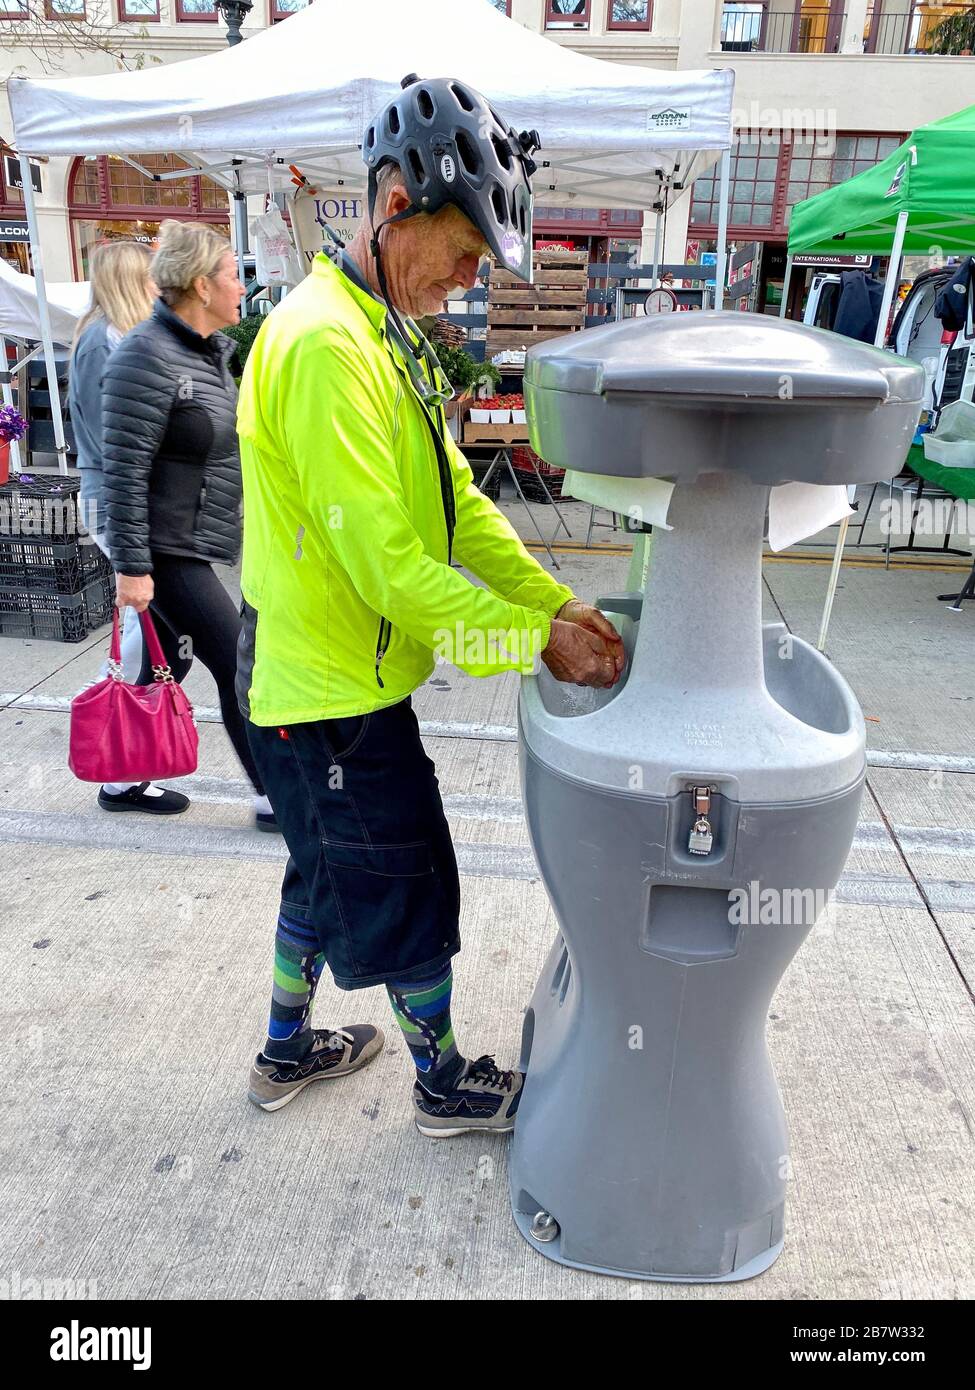 Santa Barbara, California, USA. 17th Mar, 2020. A cyclist in neon jacket who is a long time resident of Santa Barbara tries out the new hand washing station at the FarmerÃs Market: the infection-fighting contraption is a reminder Ã‘ on an otherwise temperate and beautiful Southern California evening Ã‘ that the Corona Virus is coming to town. In spite of the Covid-19 infection scare, Santa Barbara residents and tourists come out to the Tuesday evening FarmerÃs Market on March 17, 2020 to shop for fresh cut flowers, organic vegetables, wheat grass, grass fed meats, honey, olive oils, etc. Stock Photo